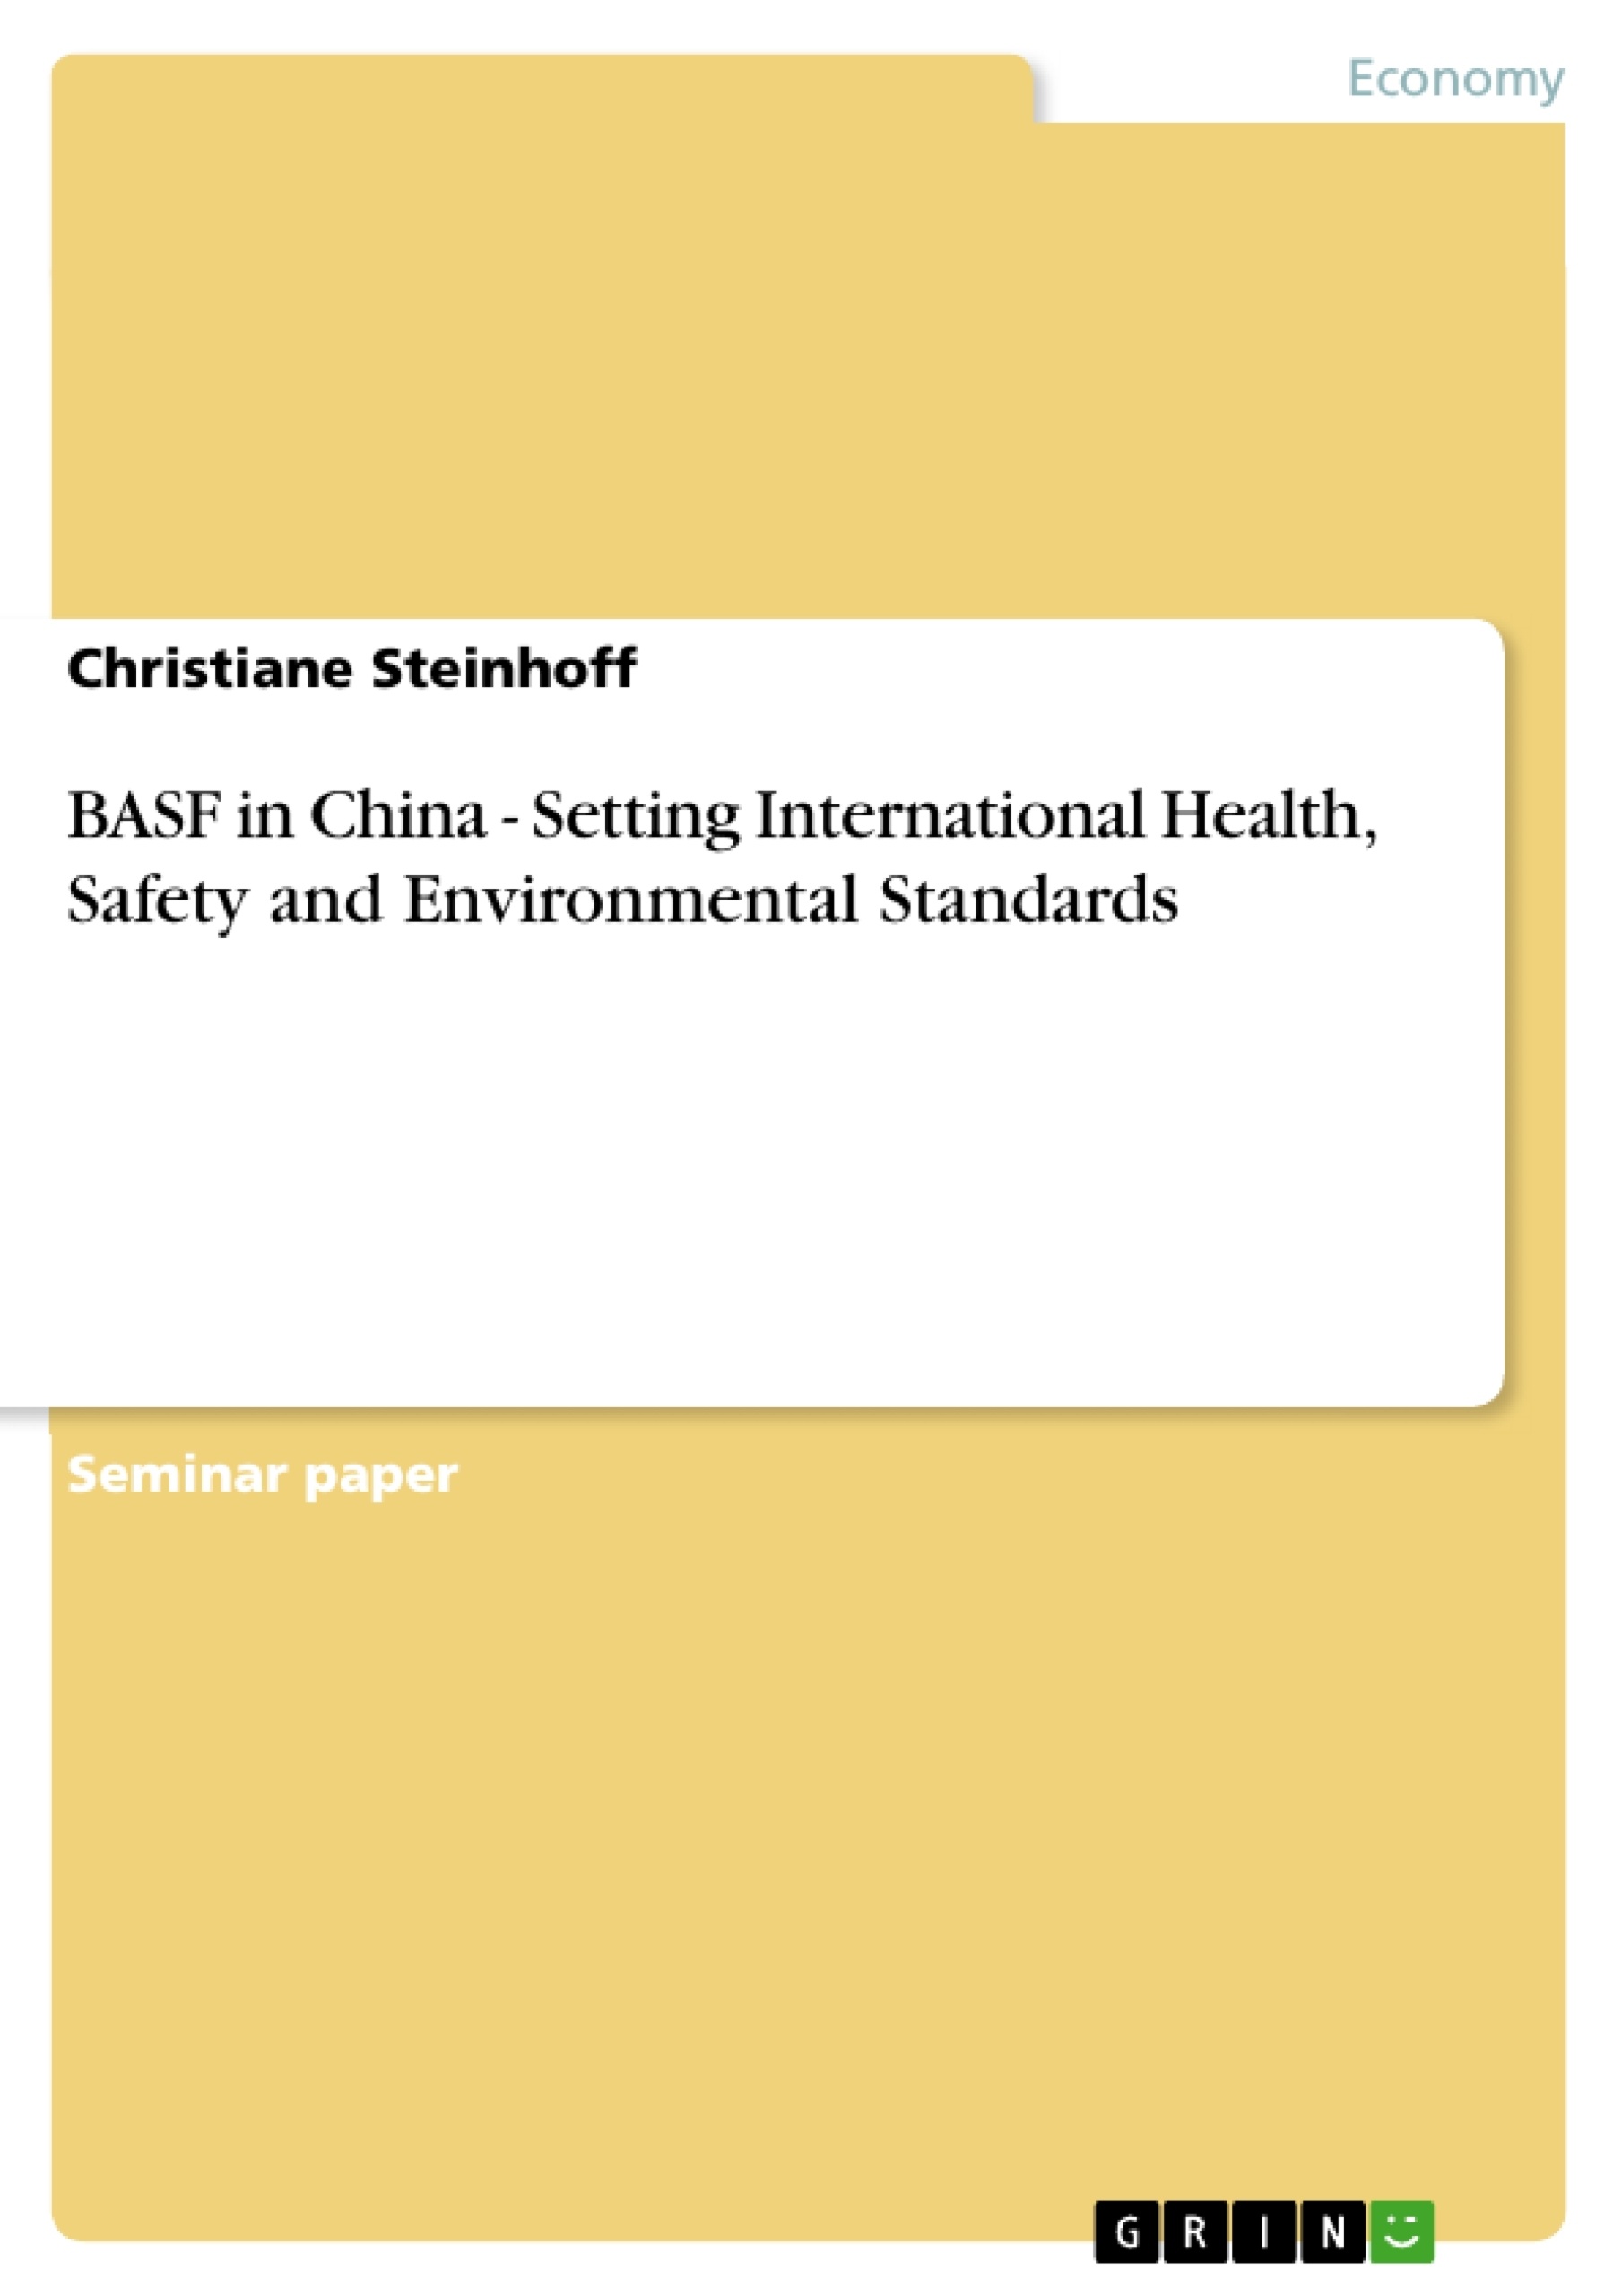 Title: BASF in China - Setting International Health, Safety and Environmental Standards